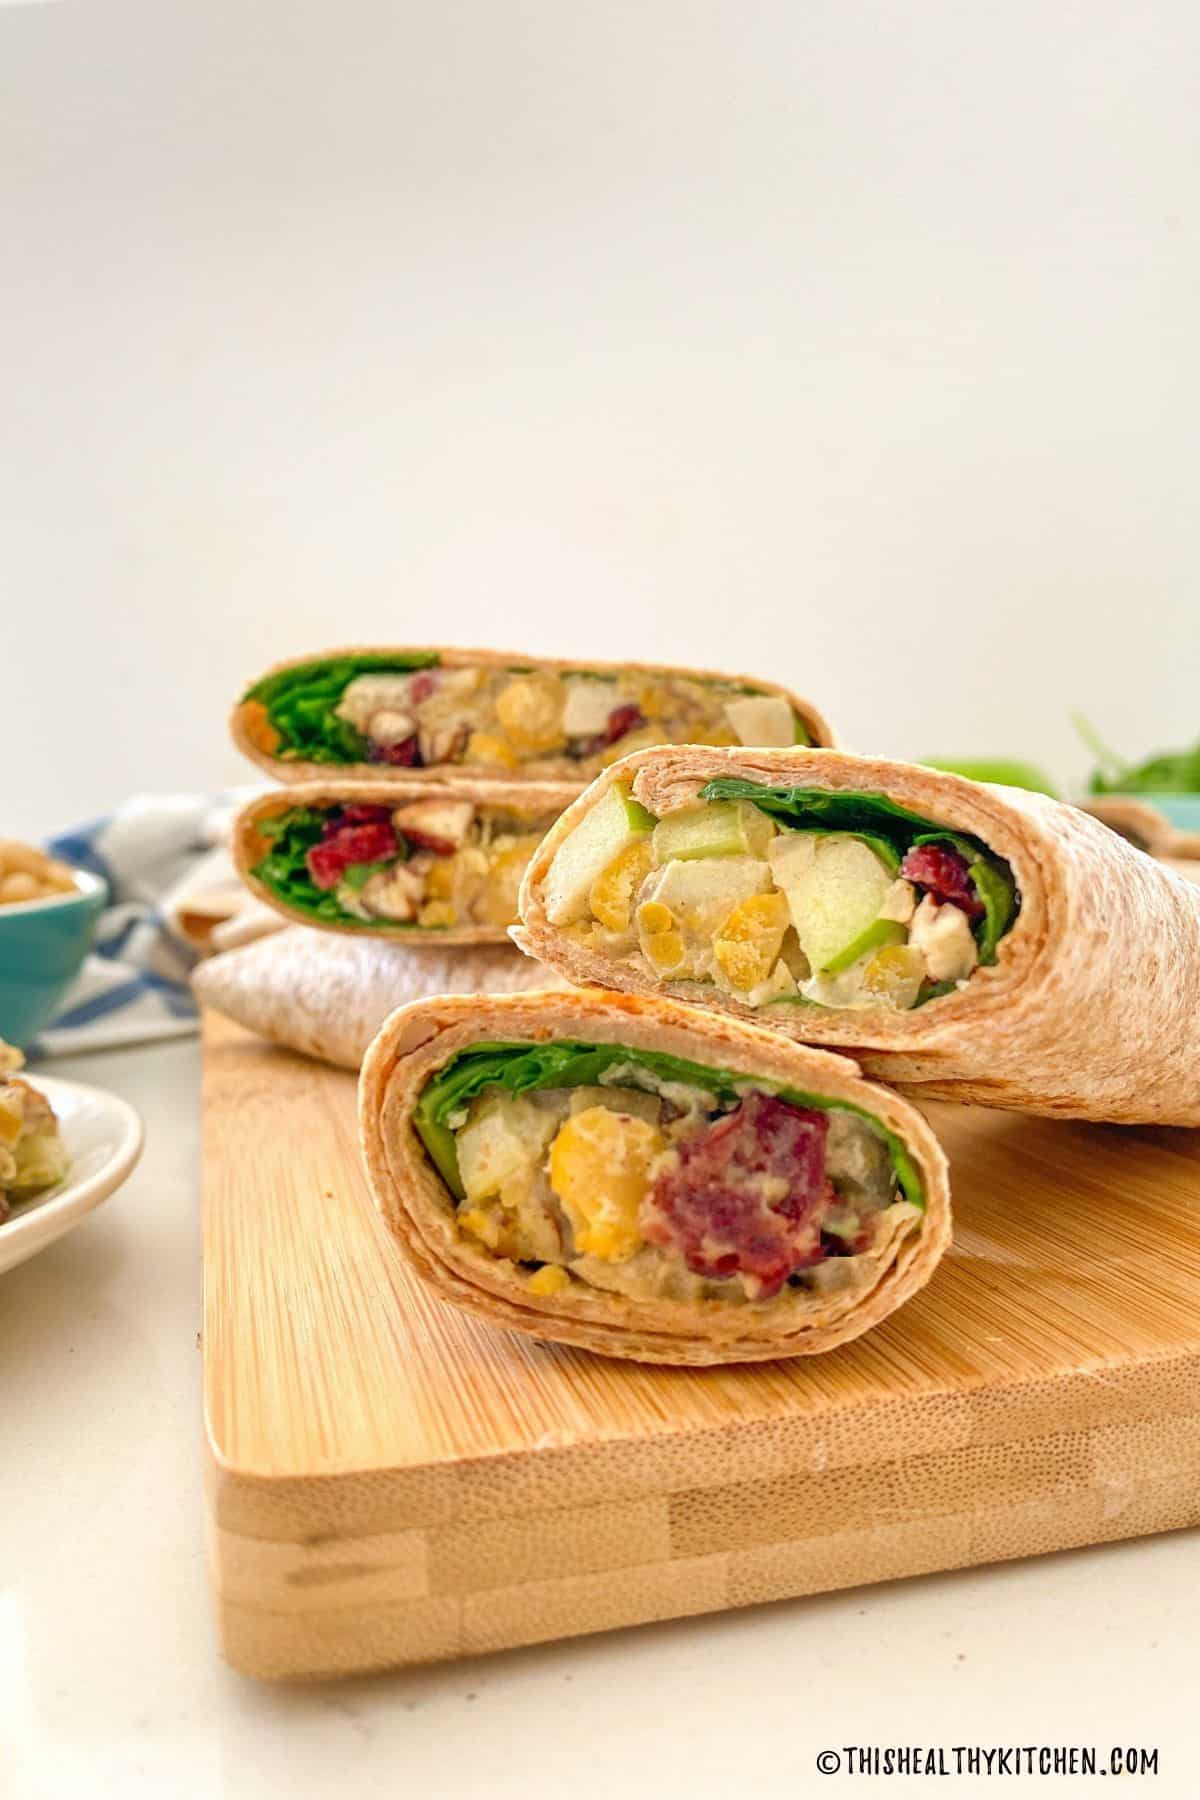 Wraps stuffed with chickpeas, cranberries, apple, celery and spinach sitting on cutting board.